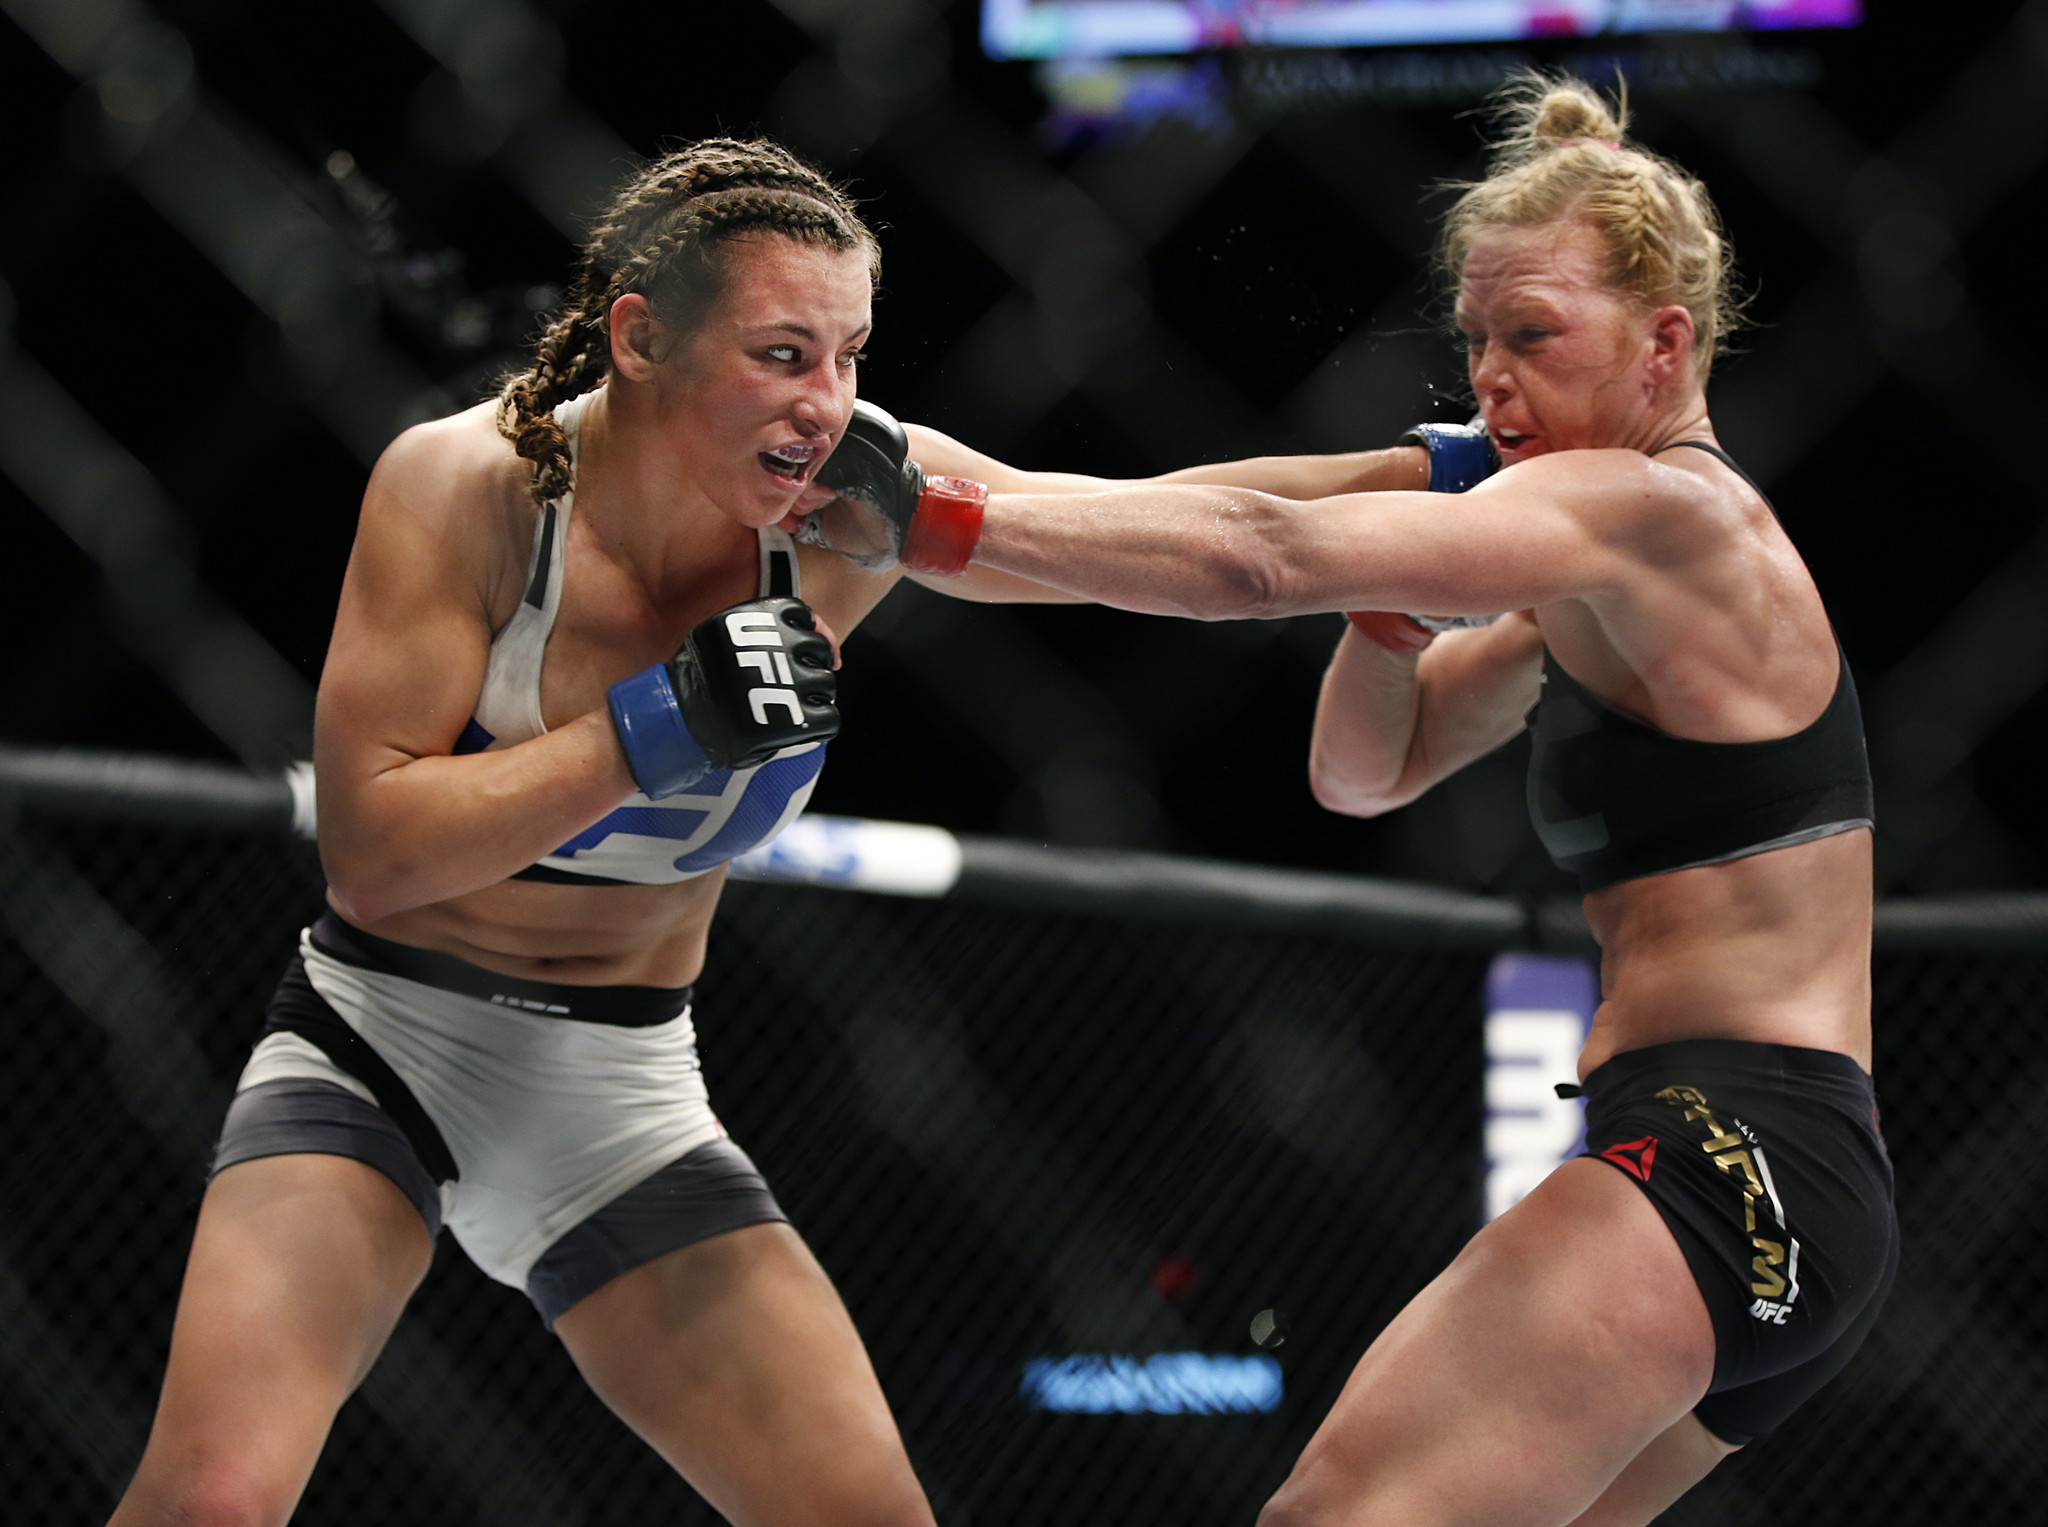 MMA rankings: Holly Holm's grave miscalculation costs her - LA Times2048 x 1527